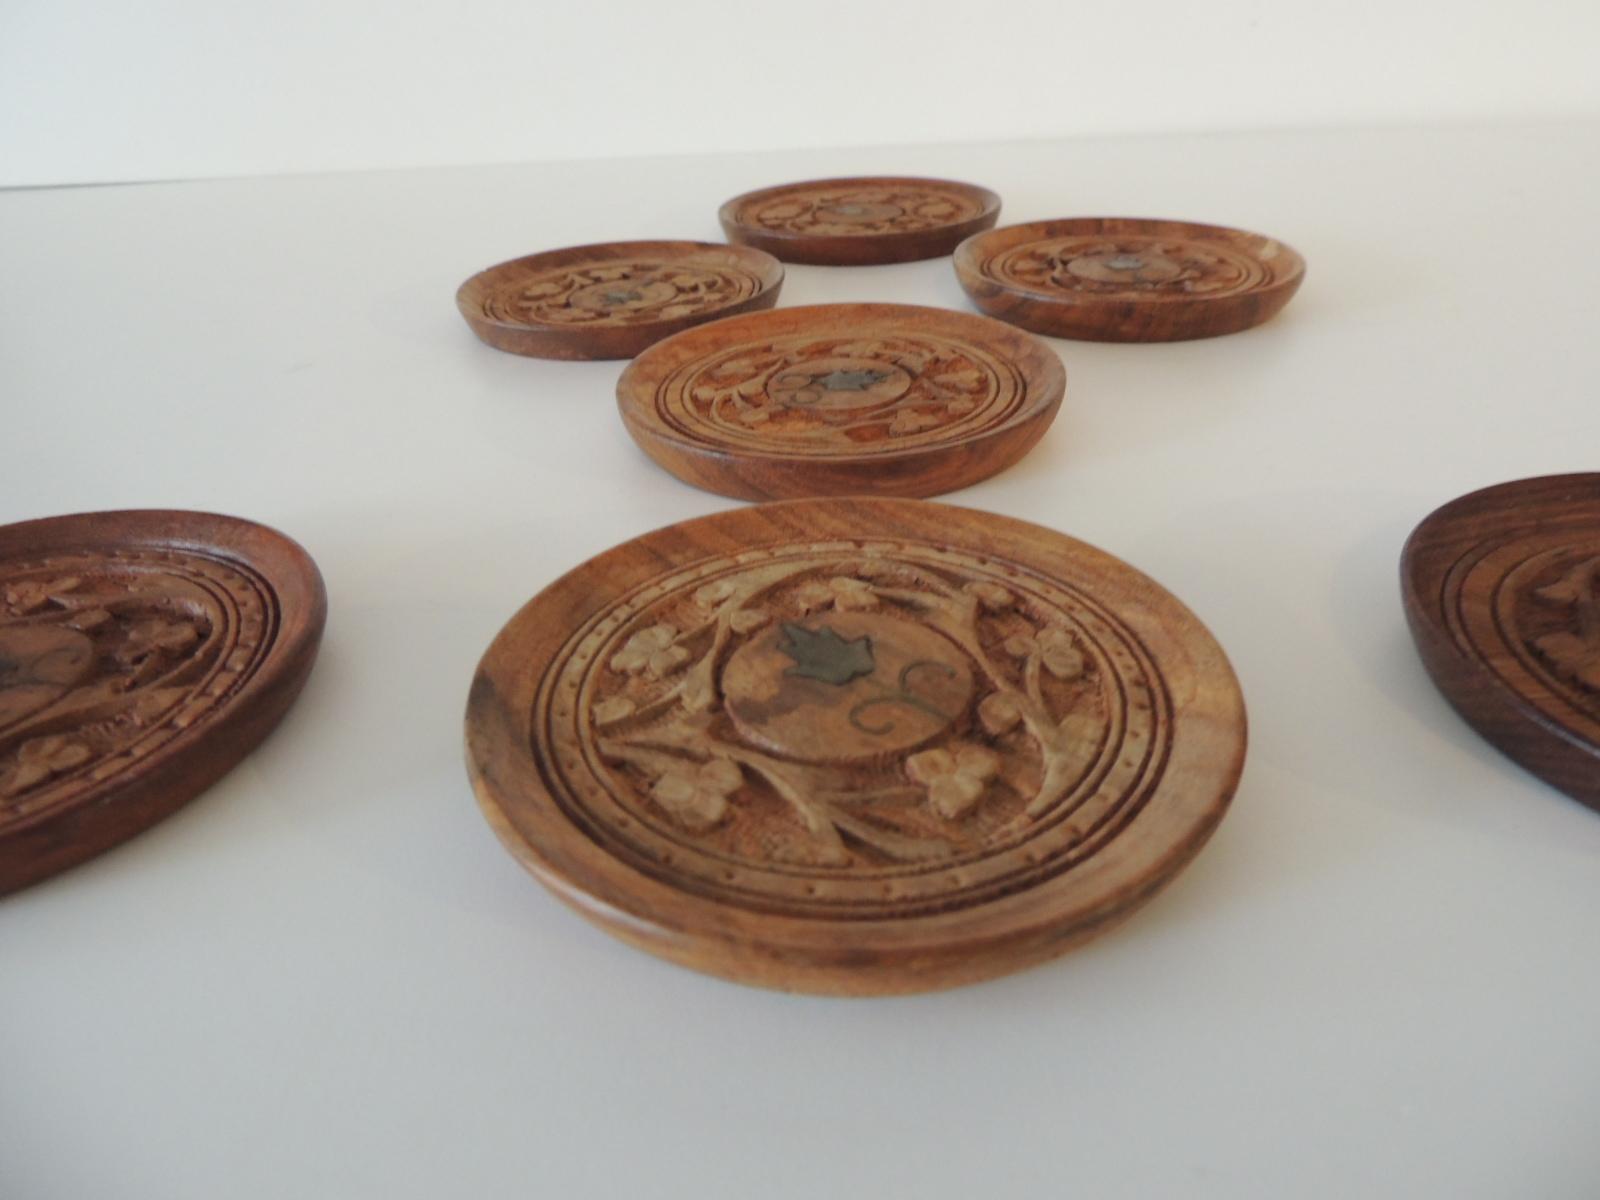 Set of (7) vintage hand carved round Indian coasters.
Size: 3.5